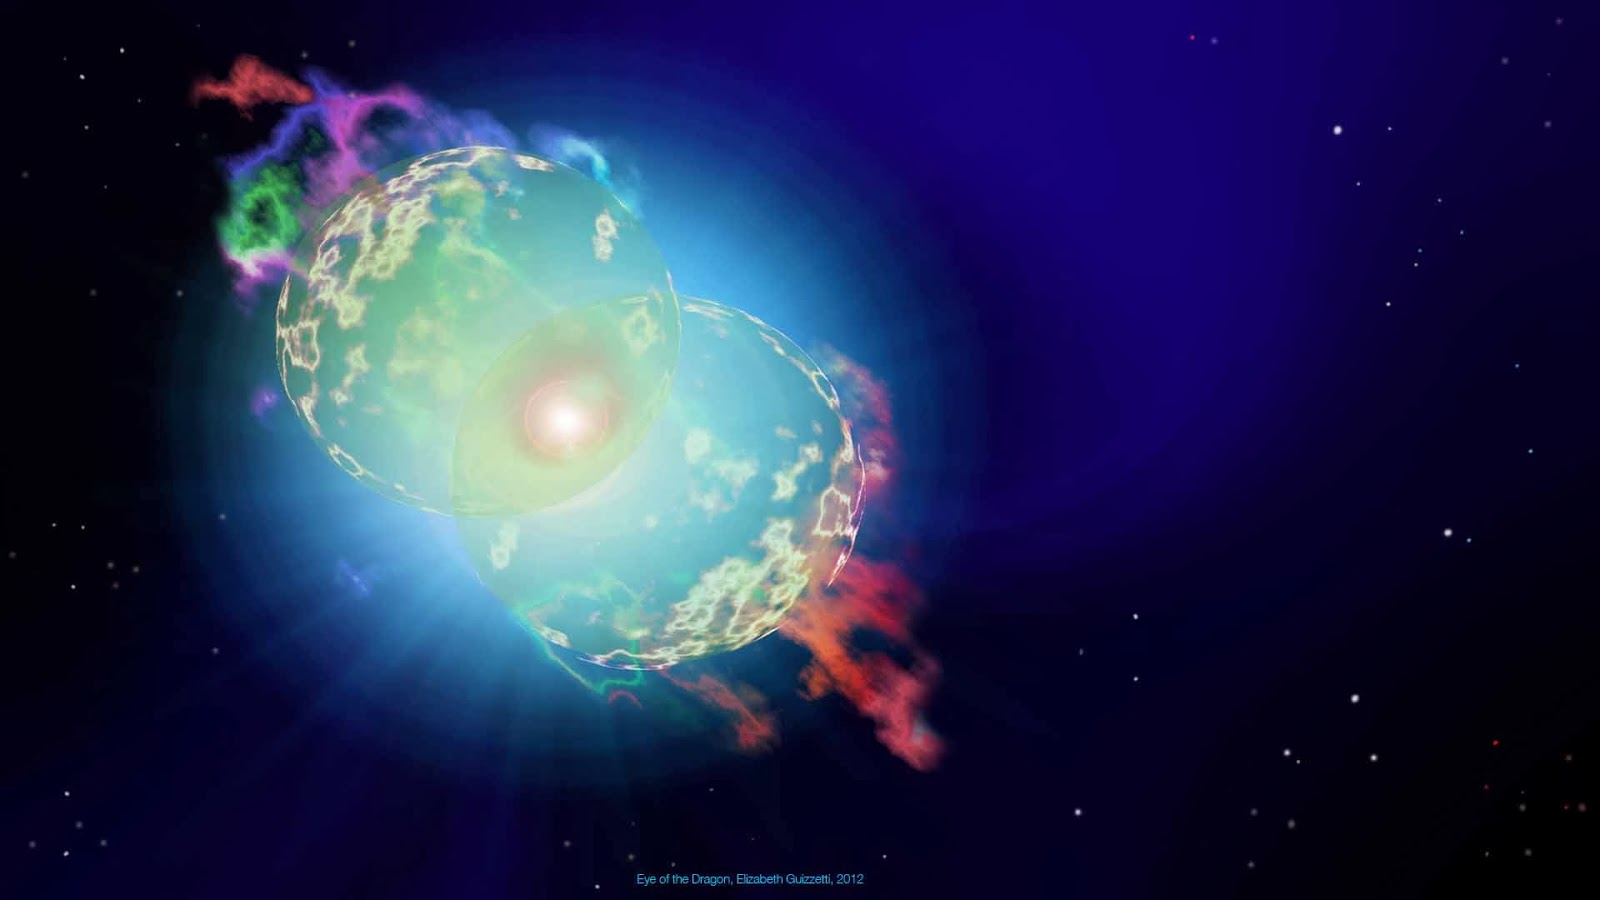 About Cats Eye Nebula Wallpaper Written By Udin Broedin Published At